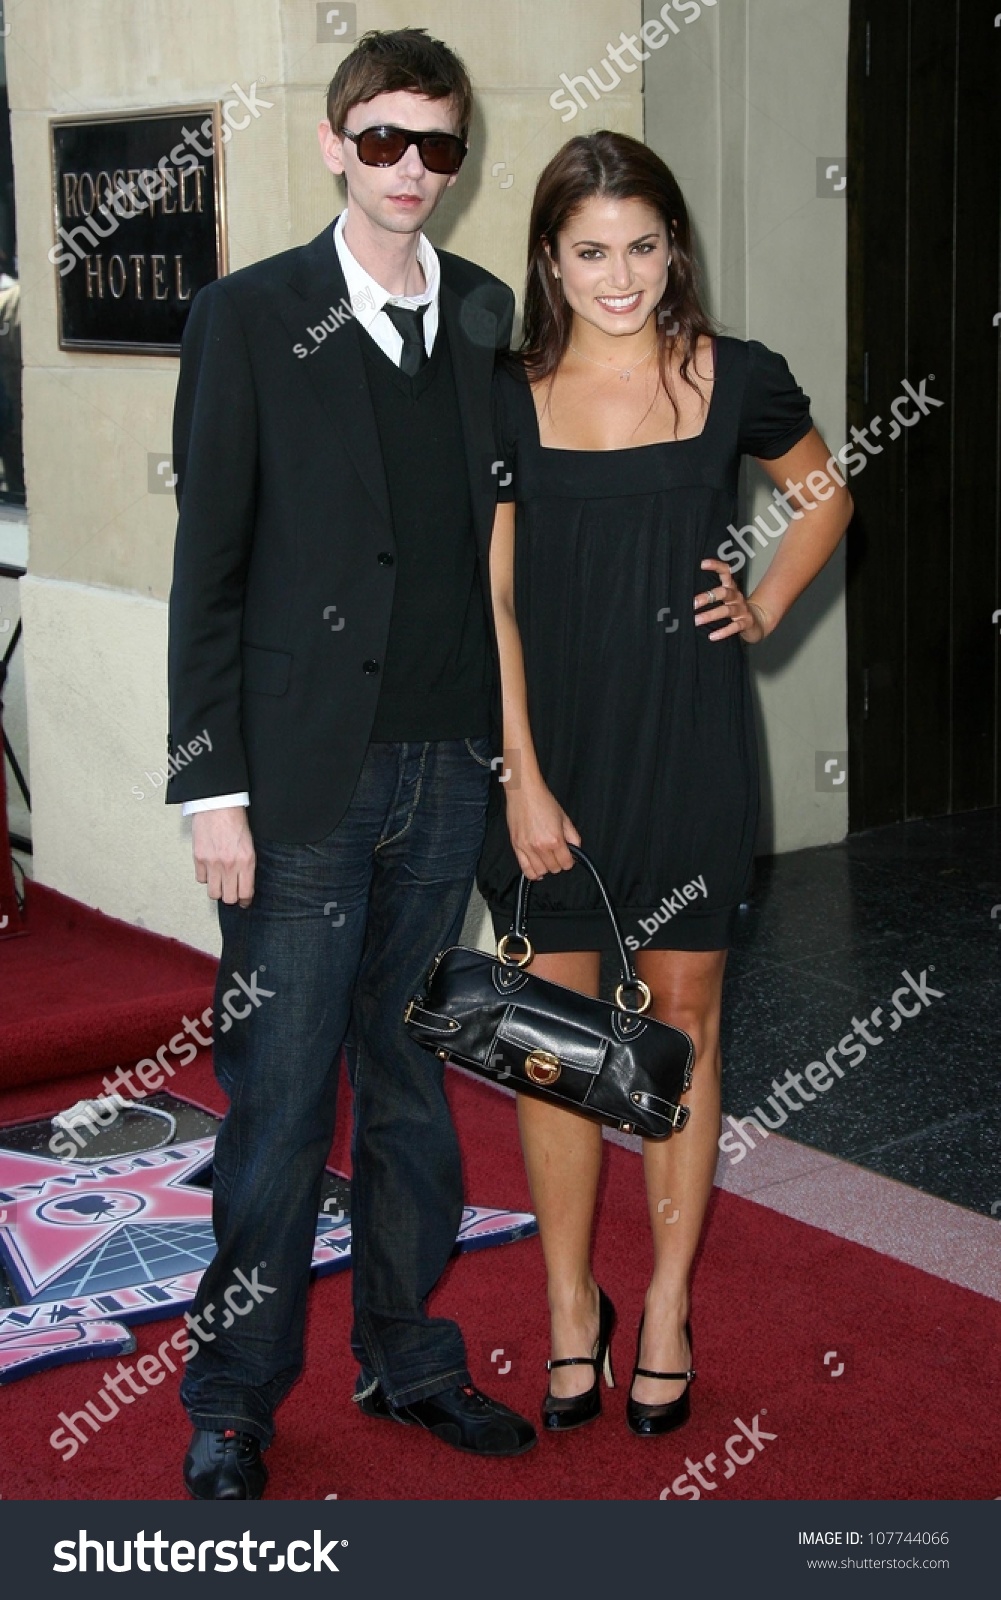 stock-photo-dj-qualls-and-nikki-reed-at-the-award-ceremony-honoring-holly-hunter-with-a-star-on-the-hollywood-107744066.jpg